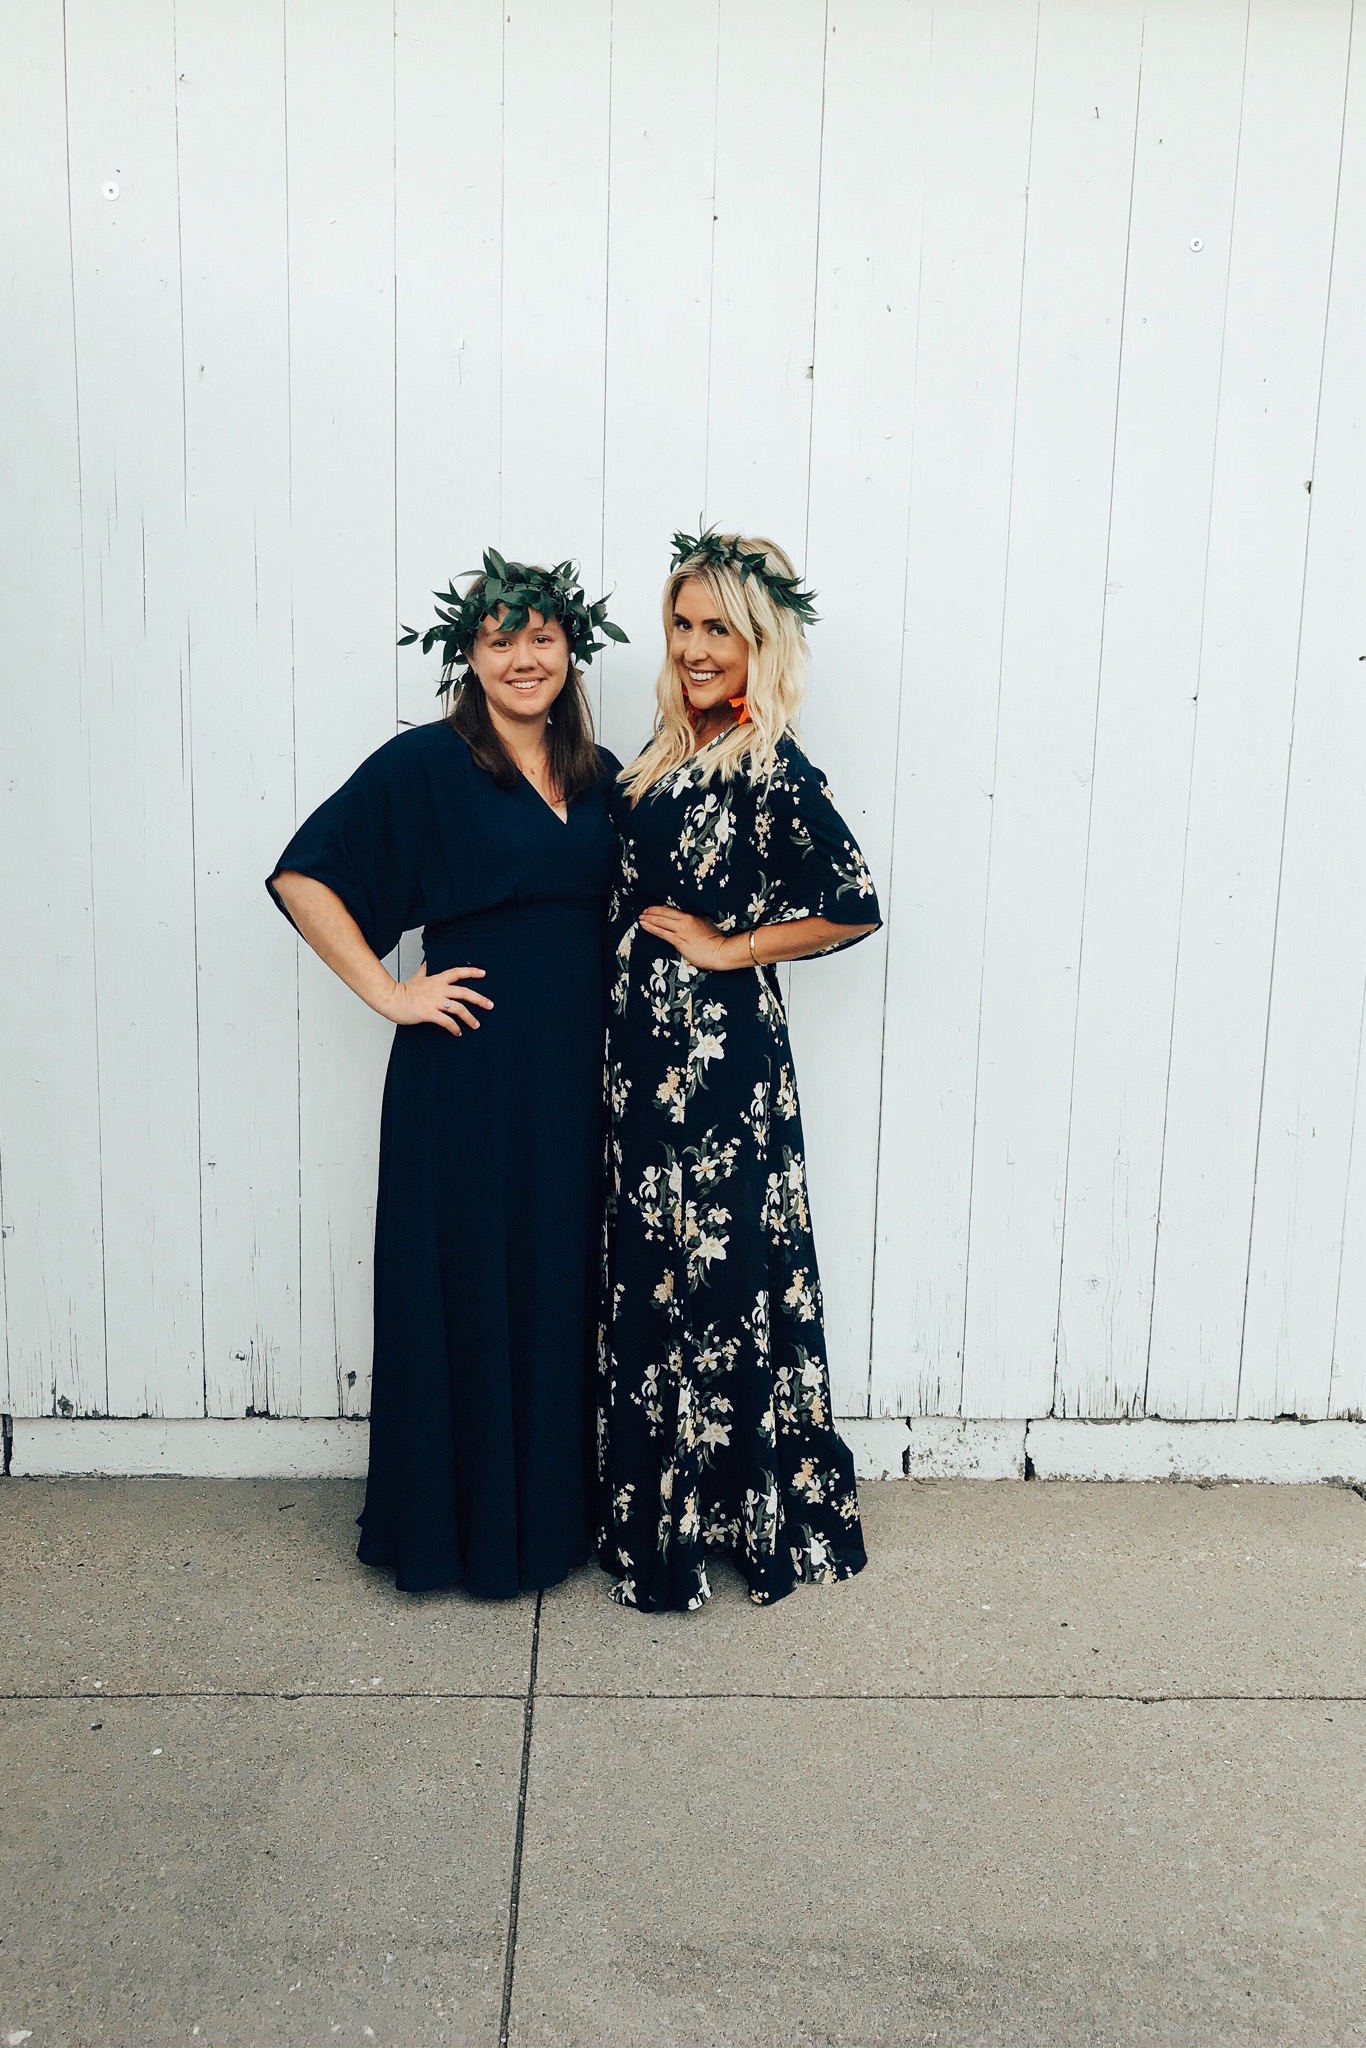 Fashion blogger KatWalkSF wearing the Reformation Winslow Maxi Dress, Reformation Dresses for Curvy Girls